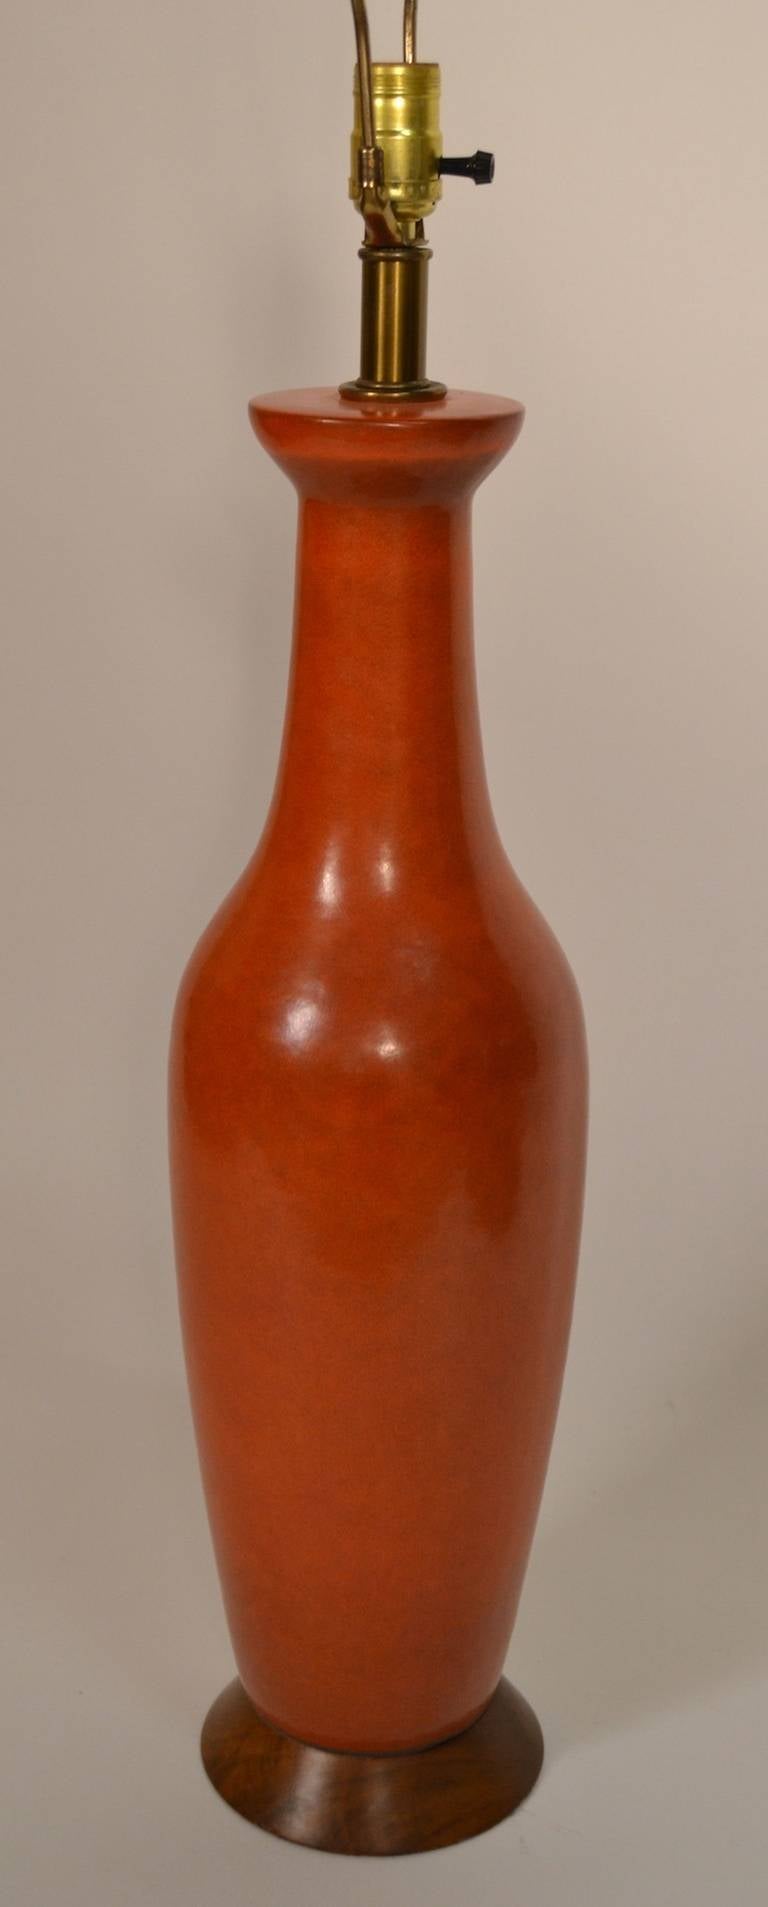 Simple bold form, solid Chinese style orange glaze, mounted on original walnut base. Height dimension in listing includes harp, height top top of orange ceramic is 24.75